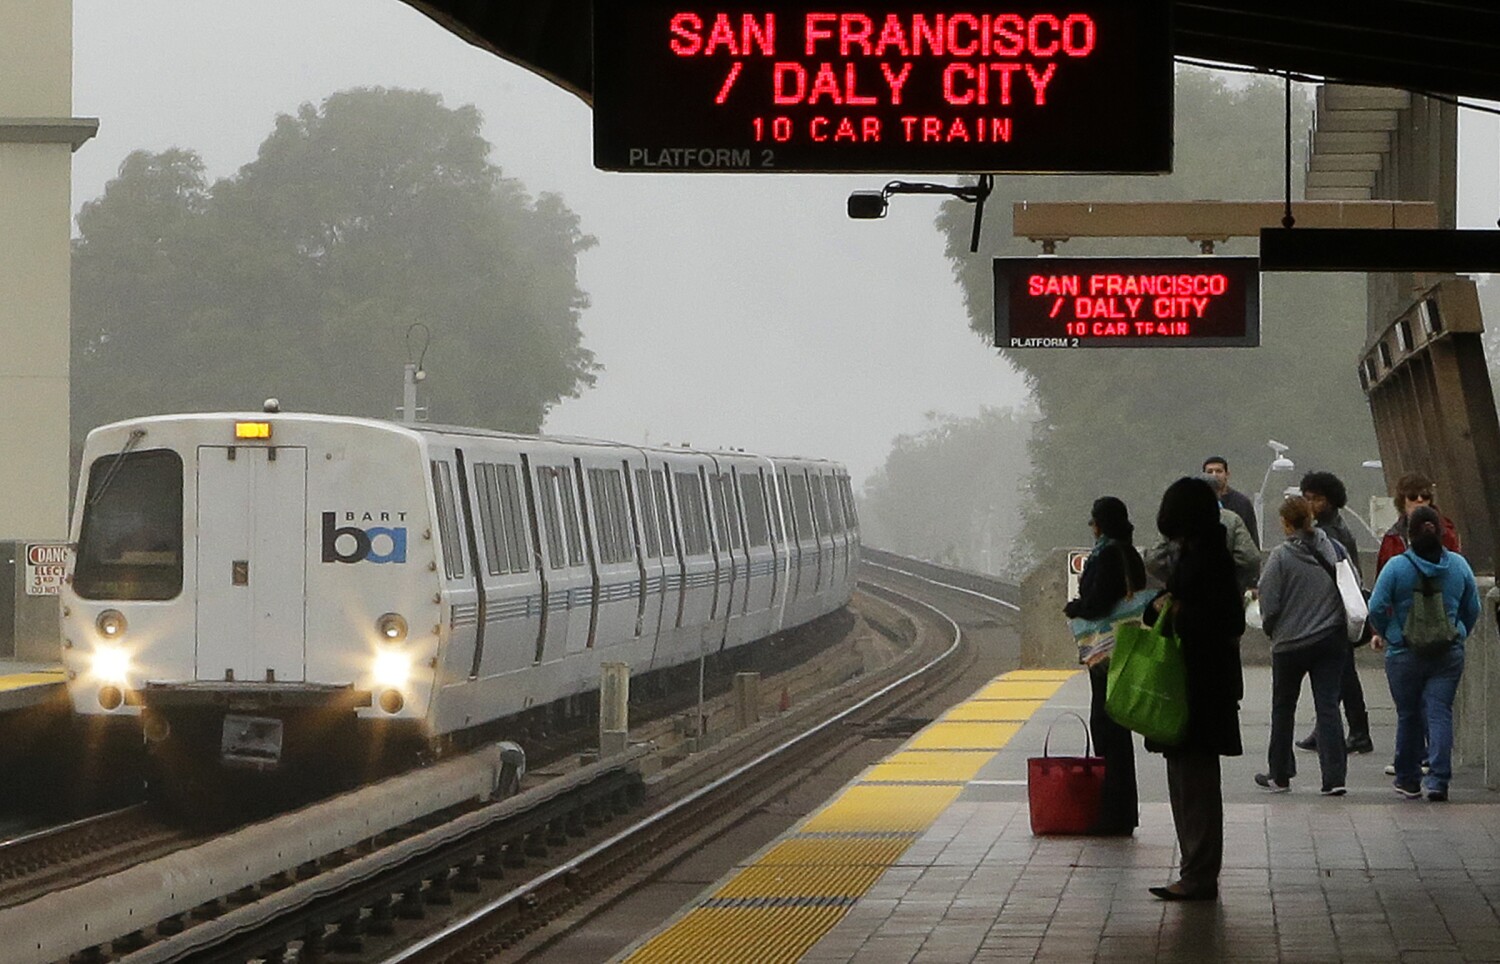 BART may need to void $40-million contract after potential conflict of interest found, inspector general says